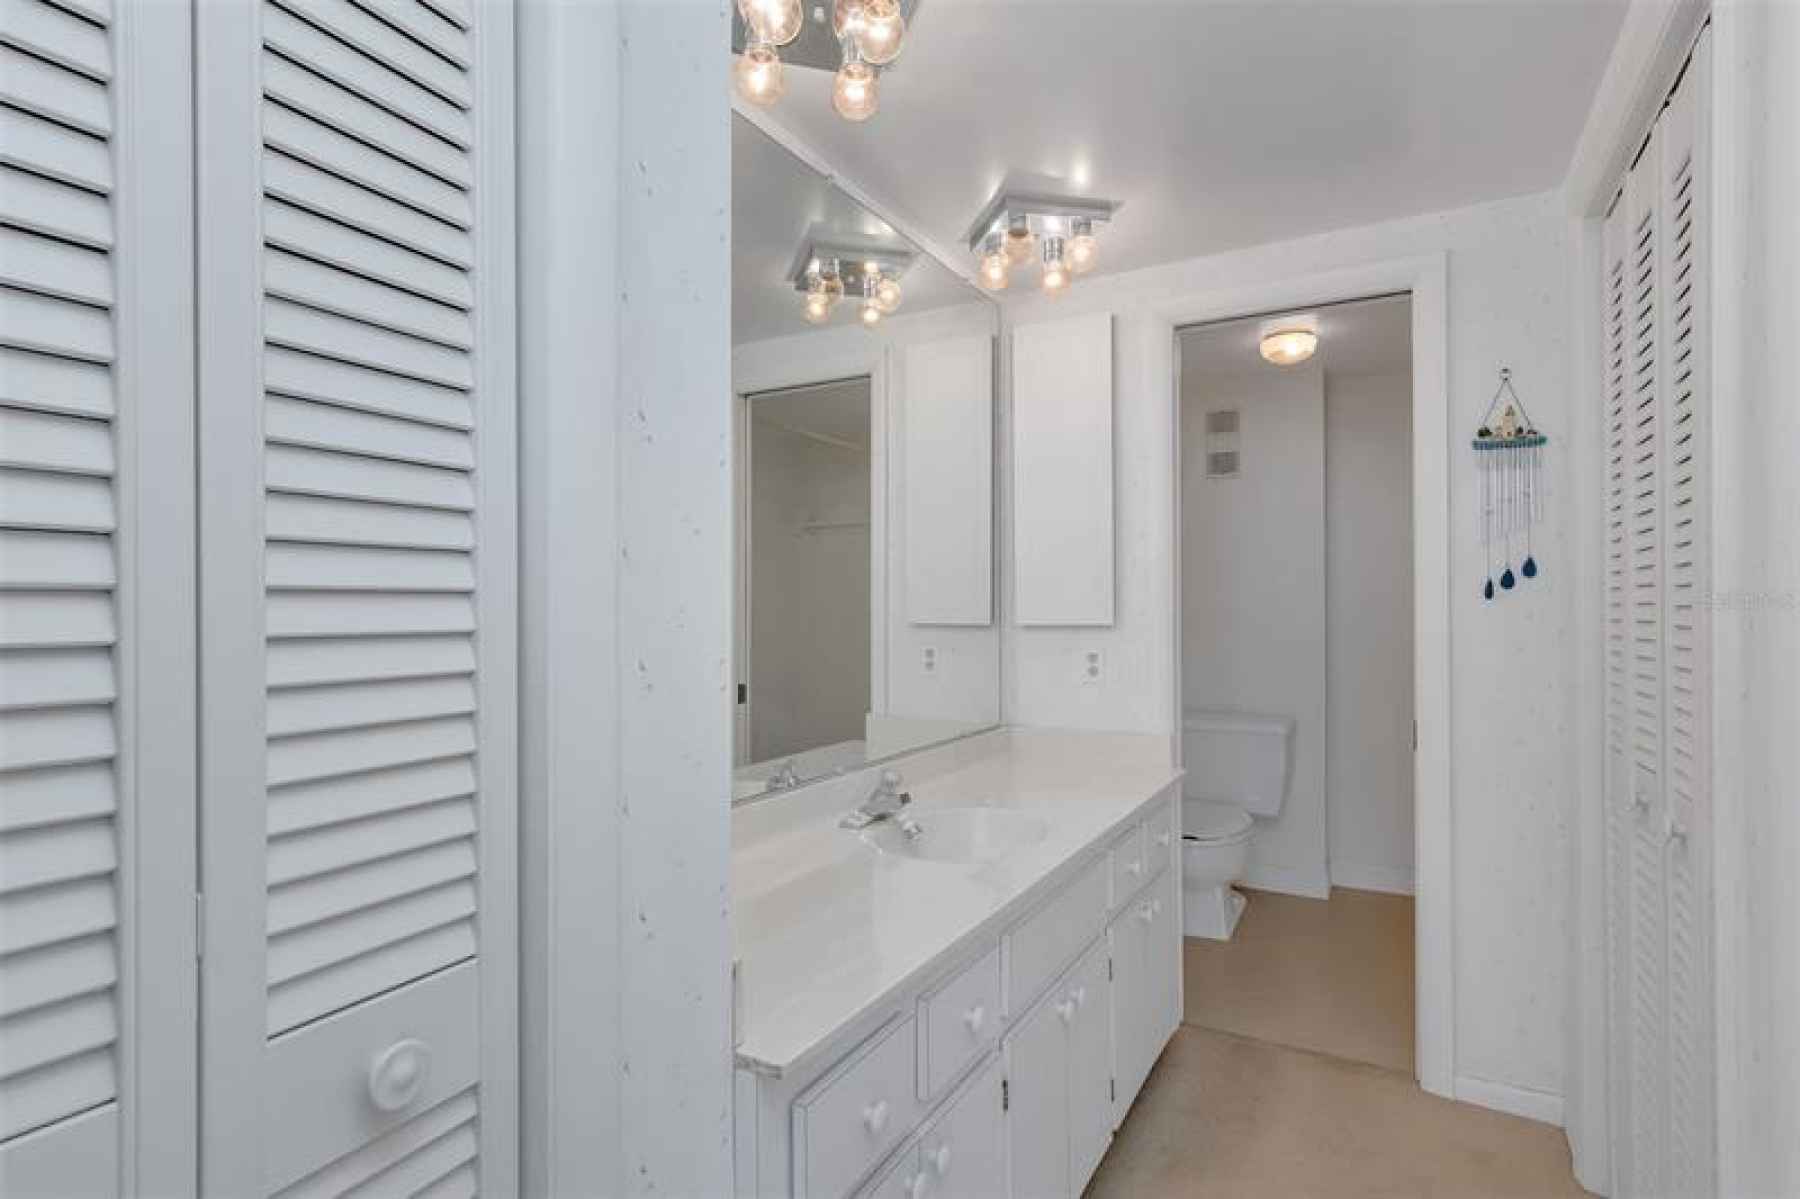 In the east bedroom, the en suite bath with spacious vanity area and multiple closets